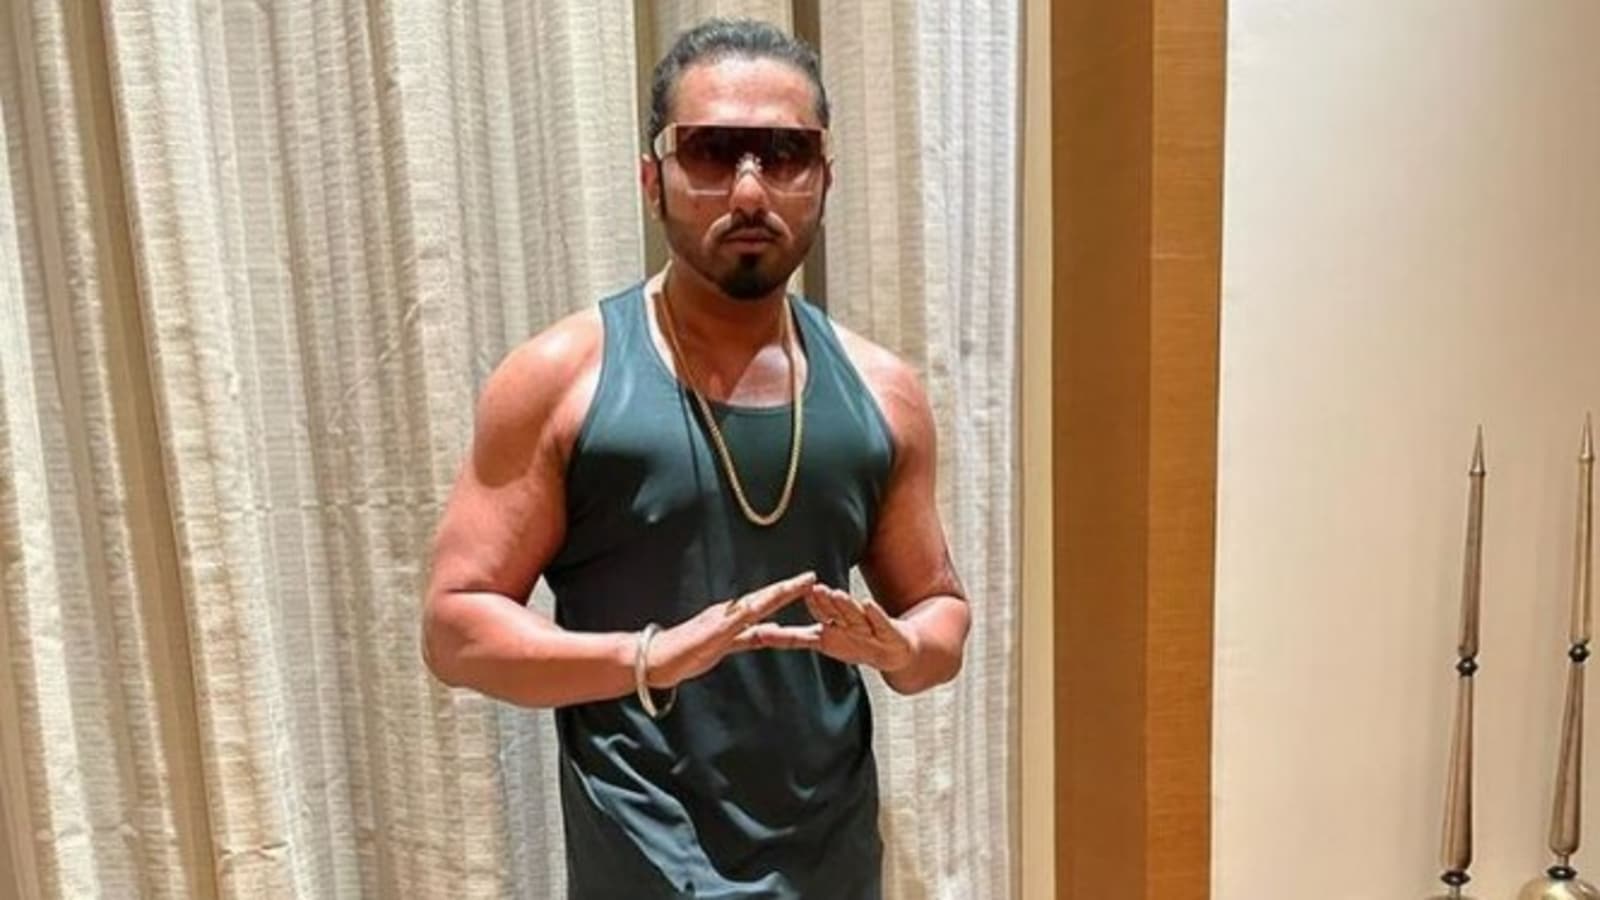 Honey Singh Xxx Video - Honey Singh's dramatic transformation impresses fans, they say: 'Welcome  back' - Hindustan Times